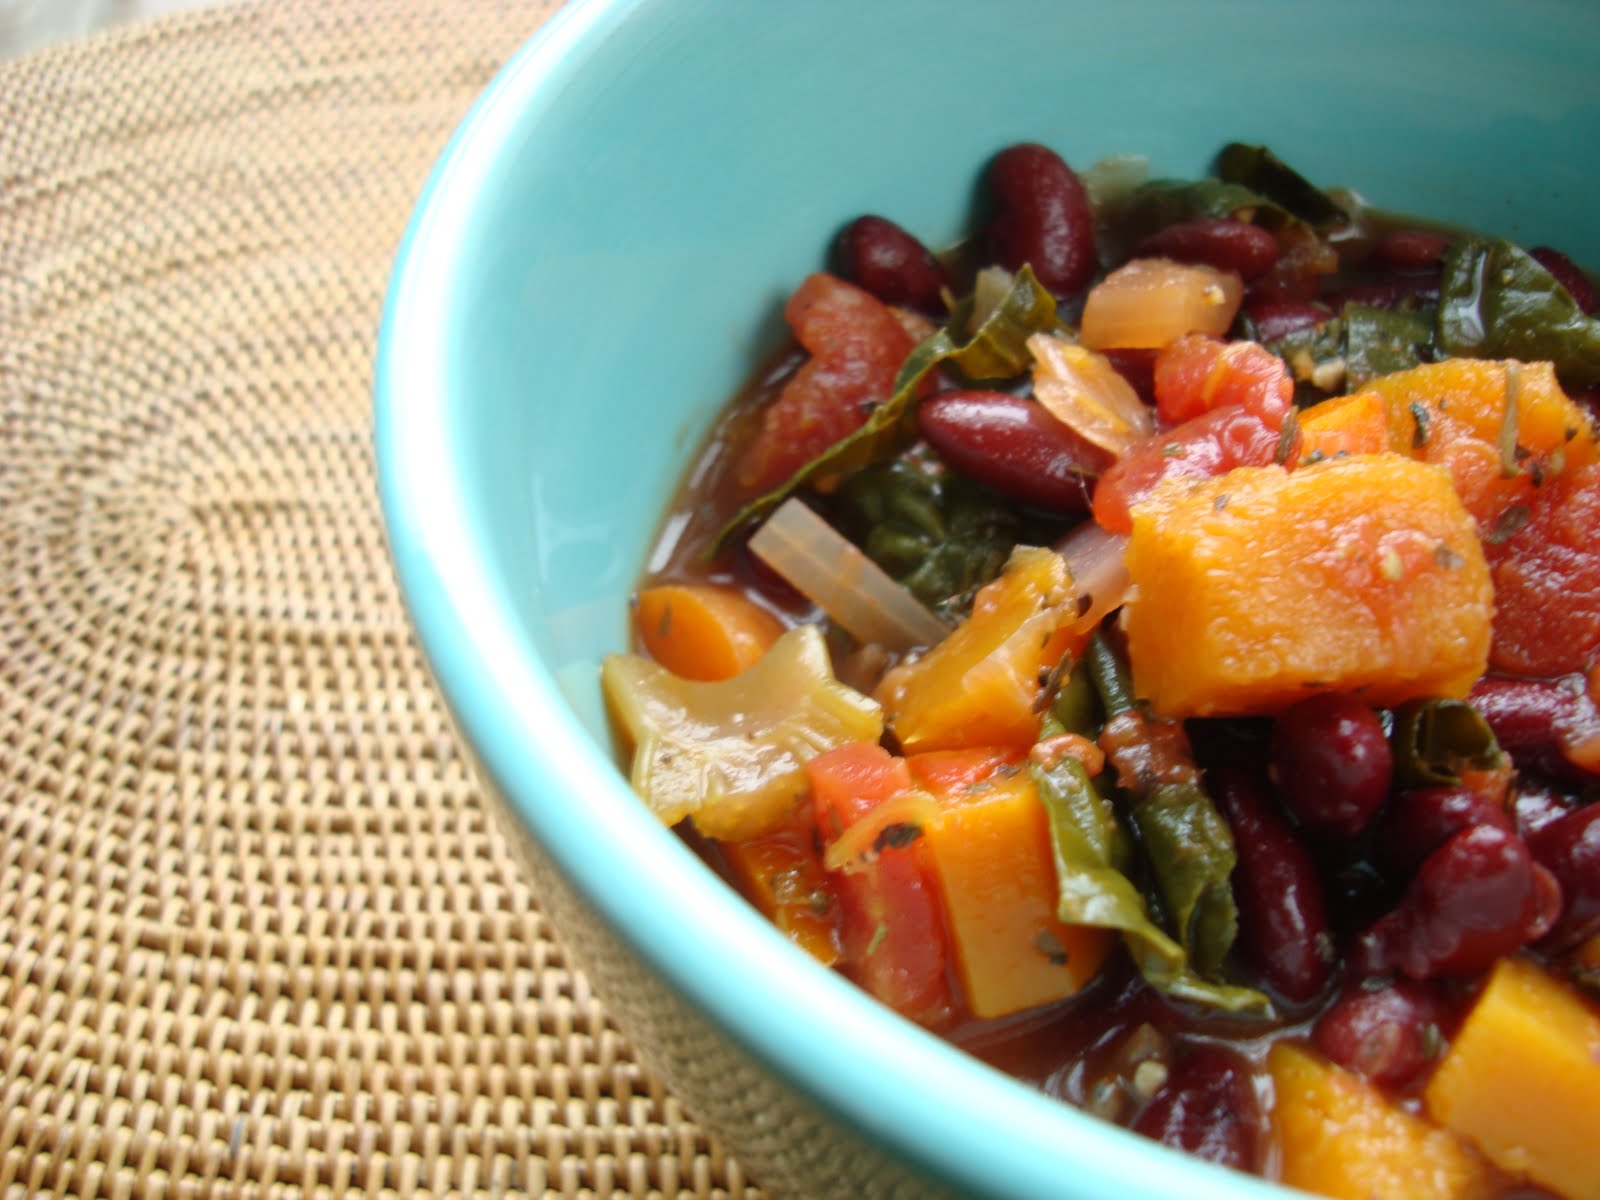 Cozy Up with a Bowl of Hearty Butternut Squash Chili